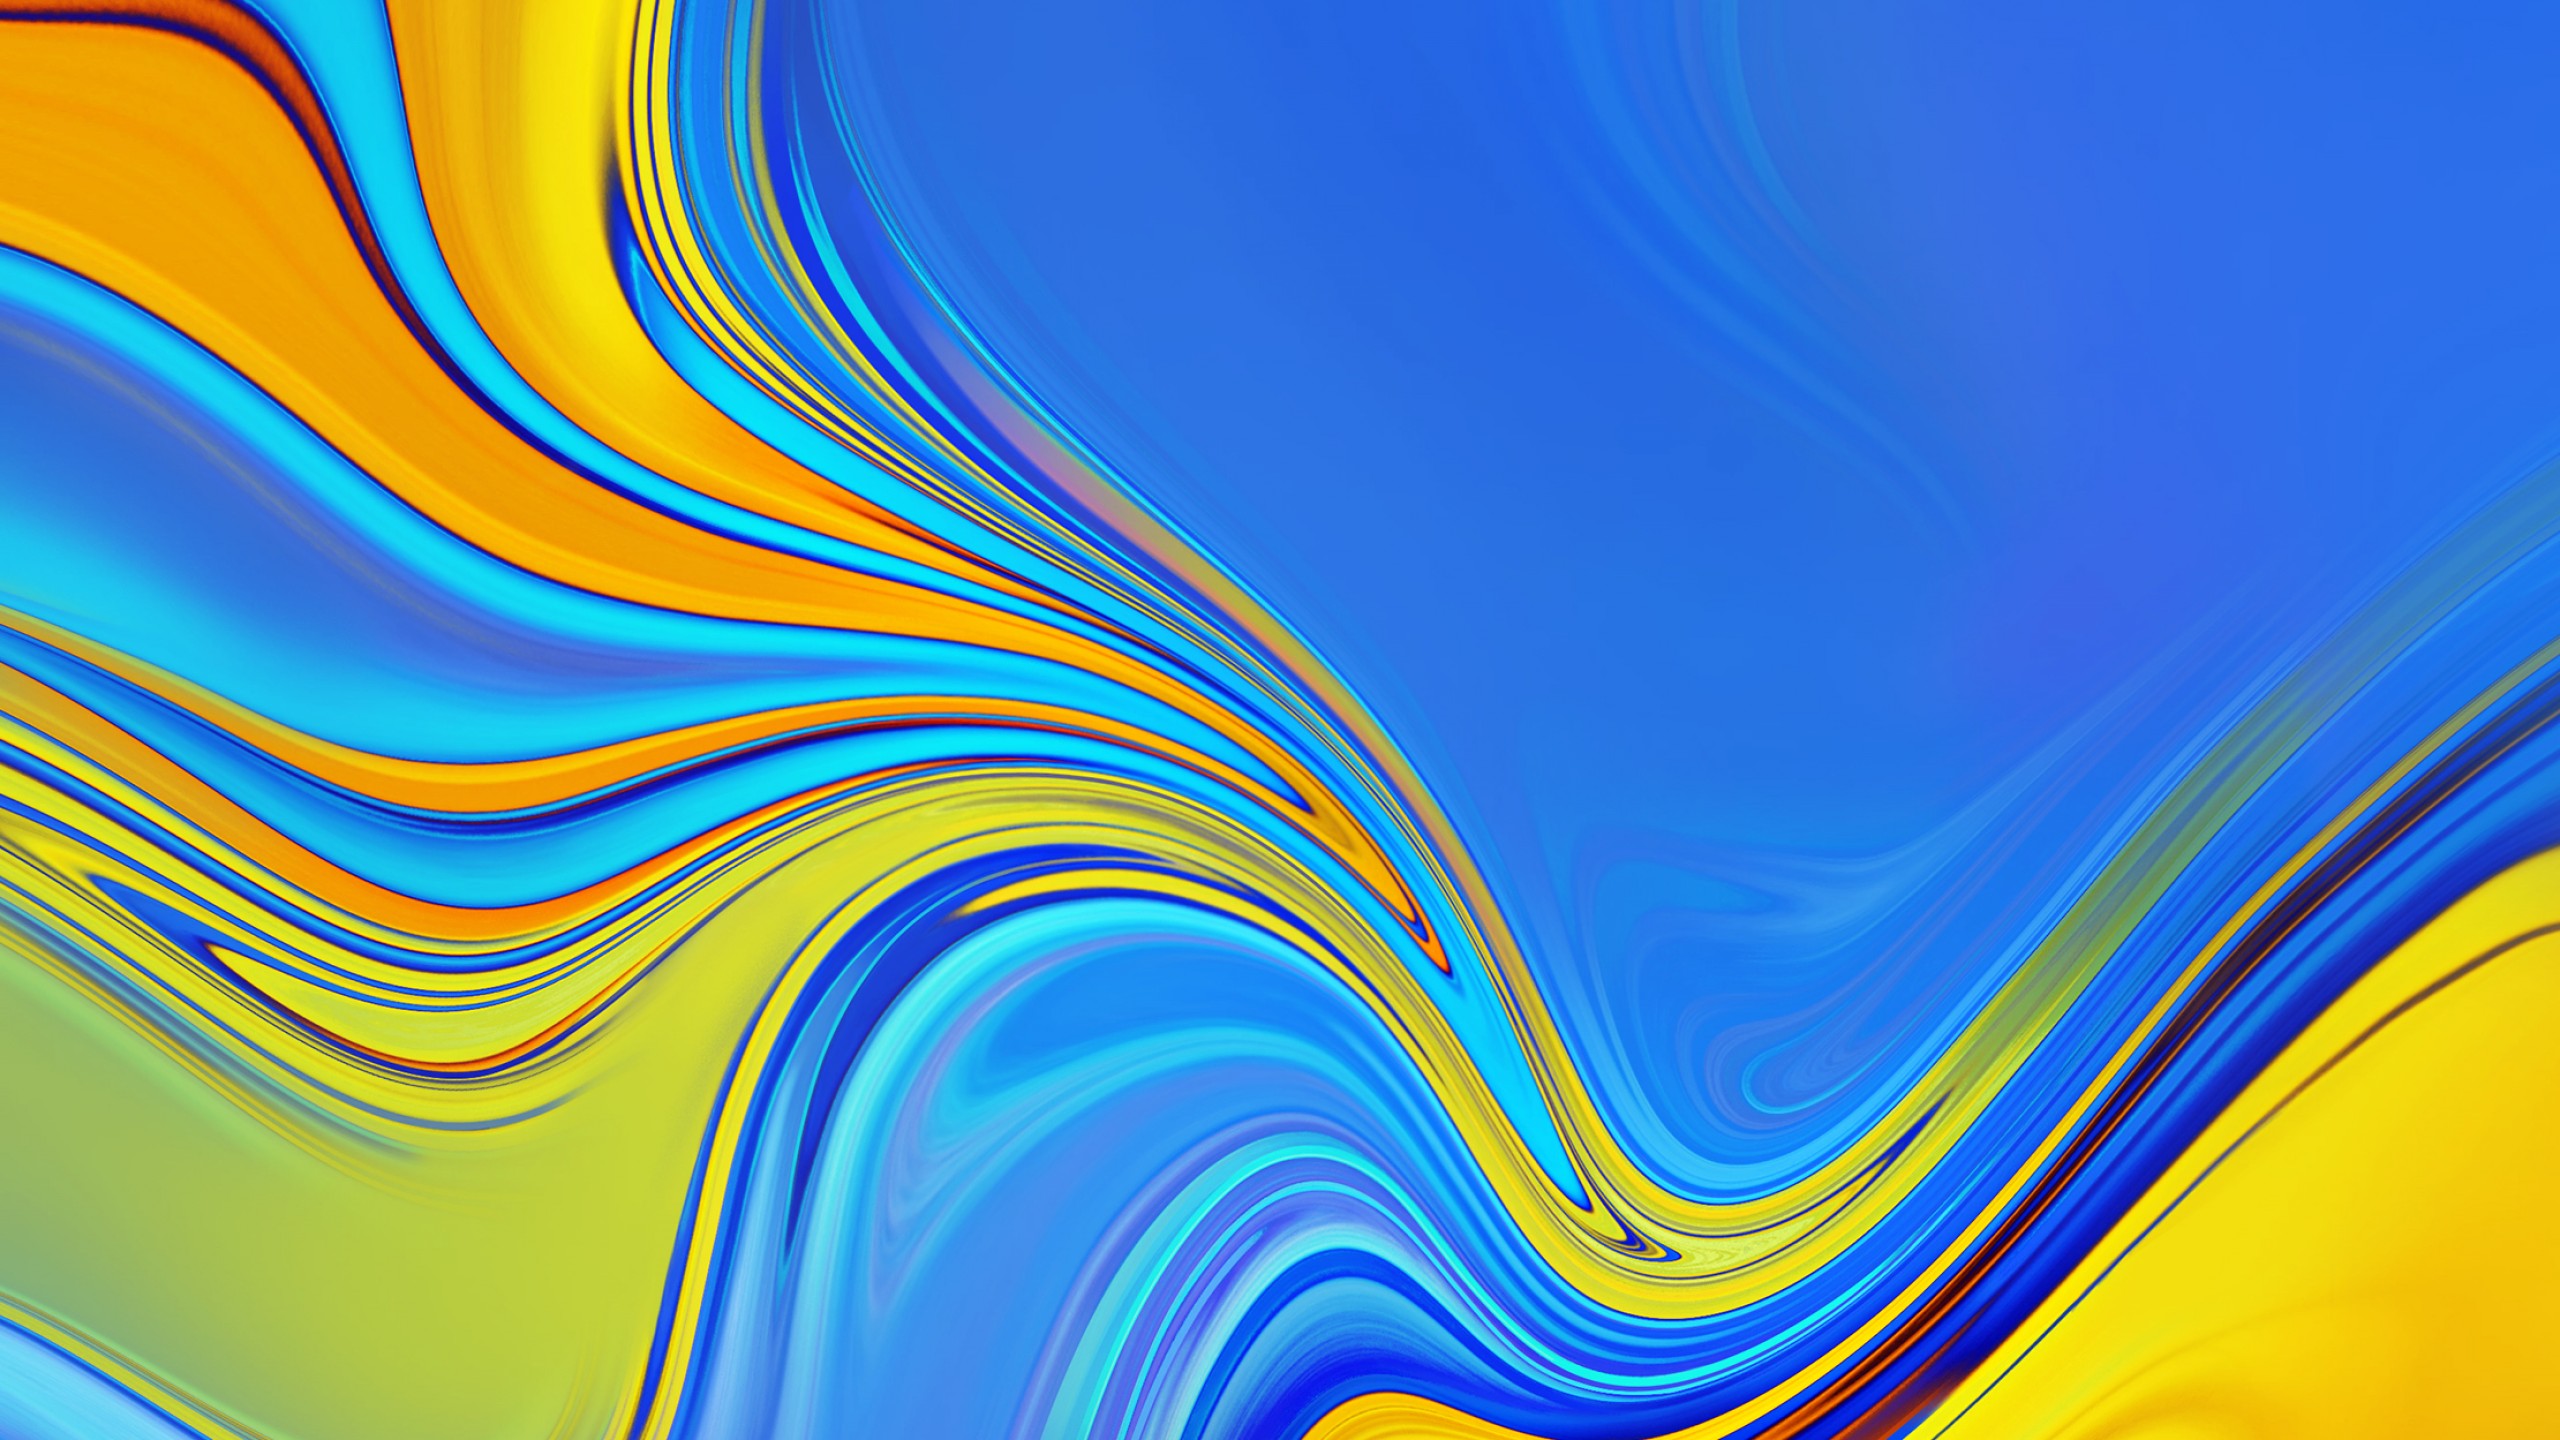 samsung hd wallpaper for android,blue,yellow,colorfulness,pattern,line